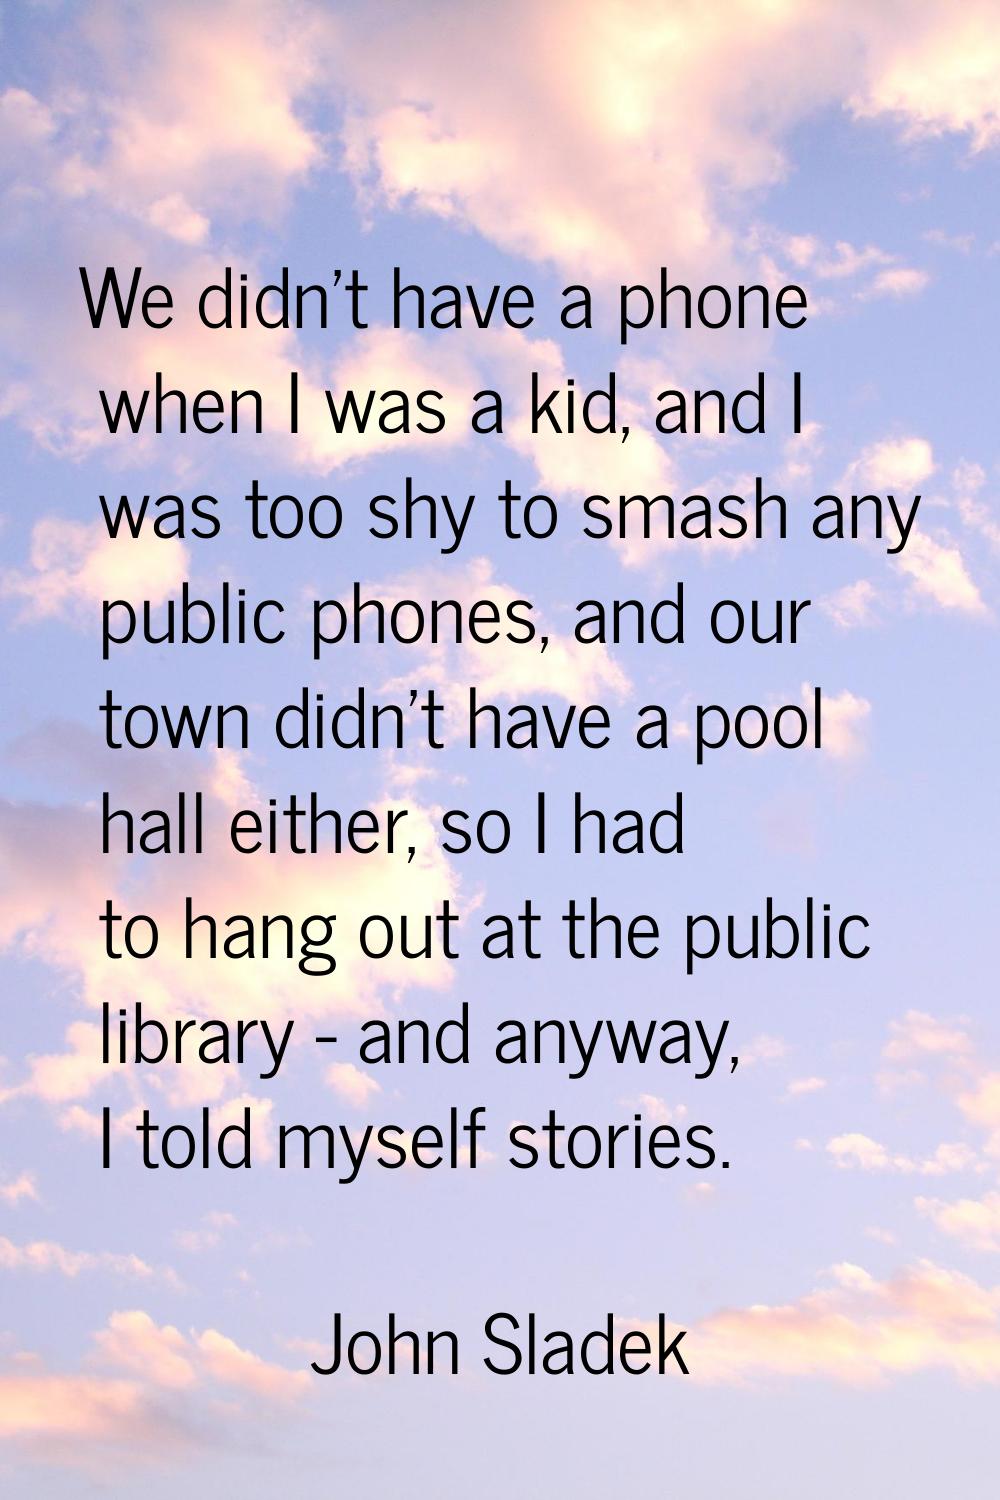 We didn't have a phone when I was a kid, and I was too shy to smash any public phones, and our town